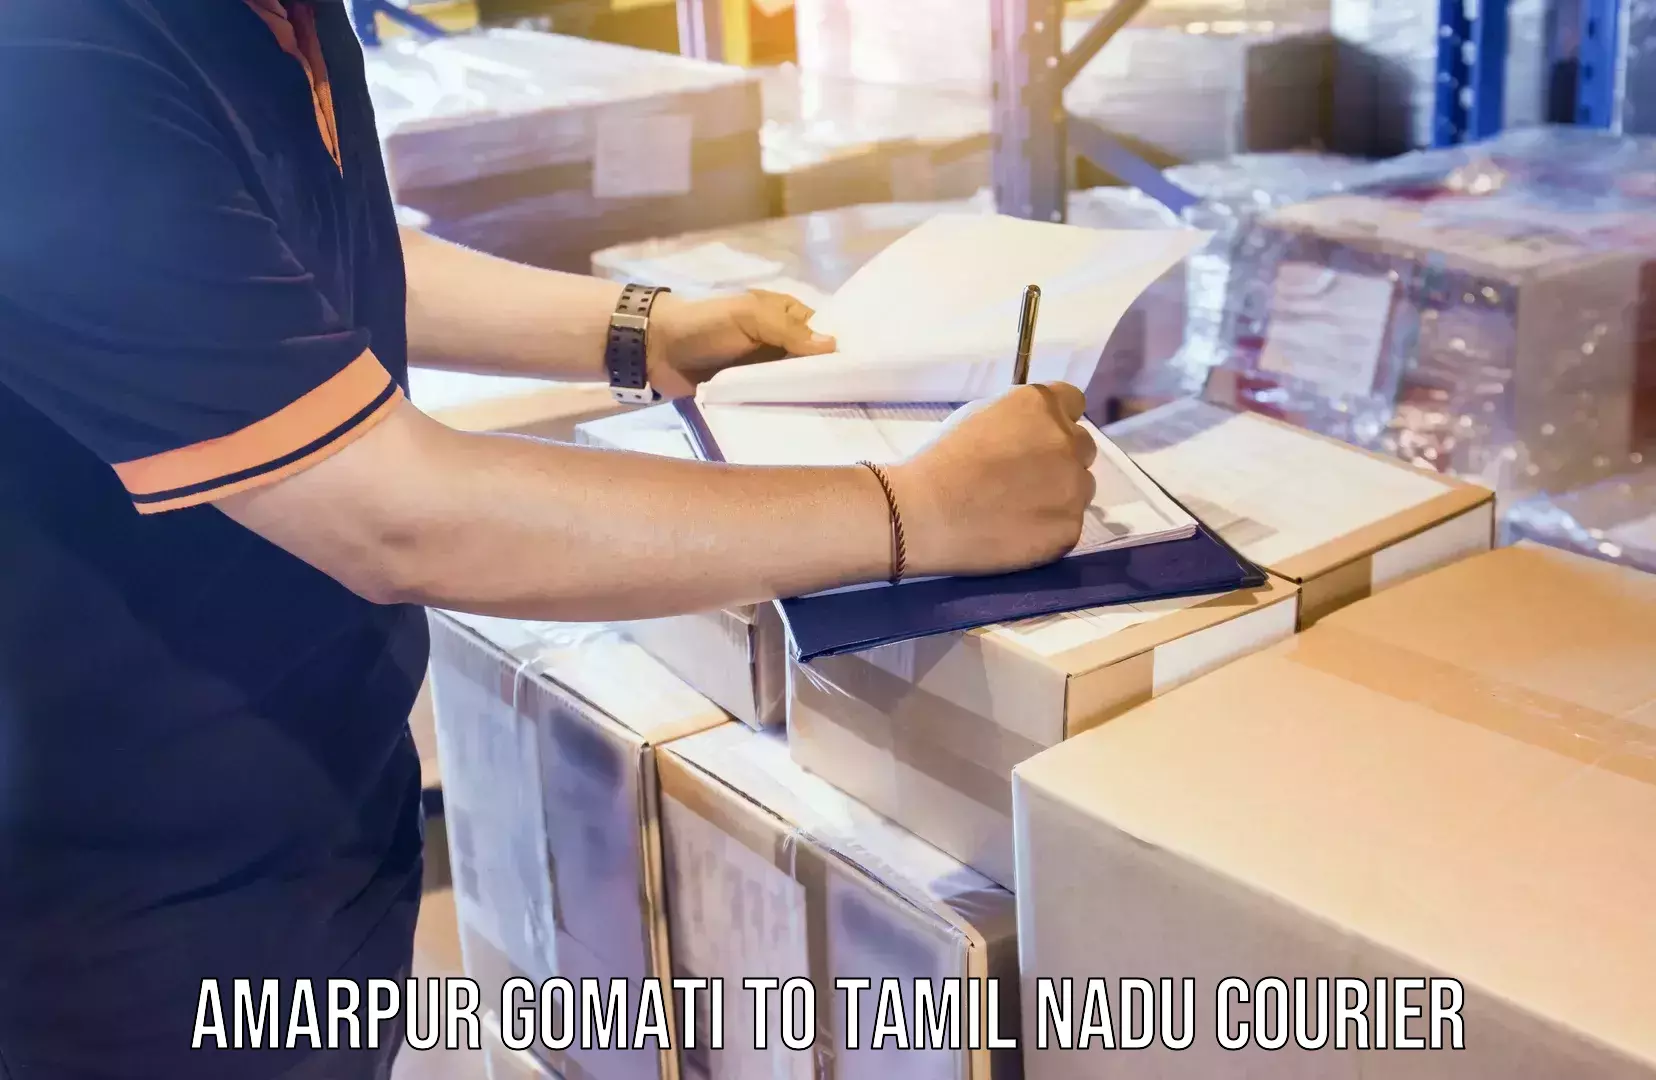 Customized delivery solutions Amarpur Gomati to Tamil Nadu